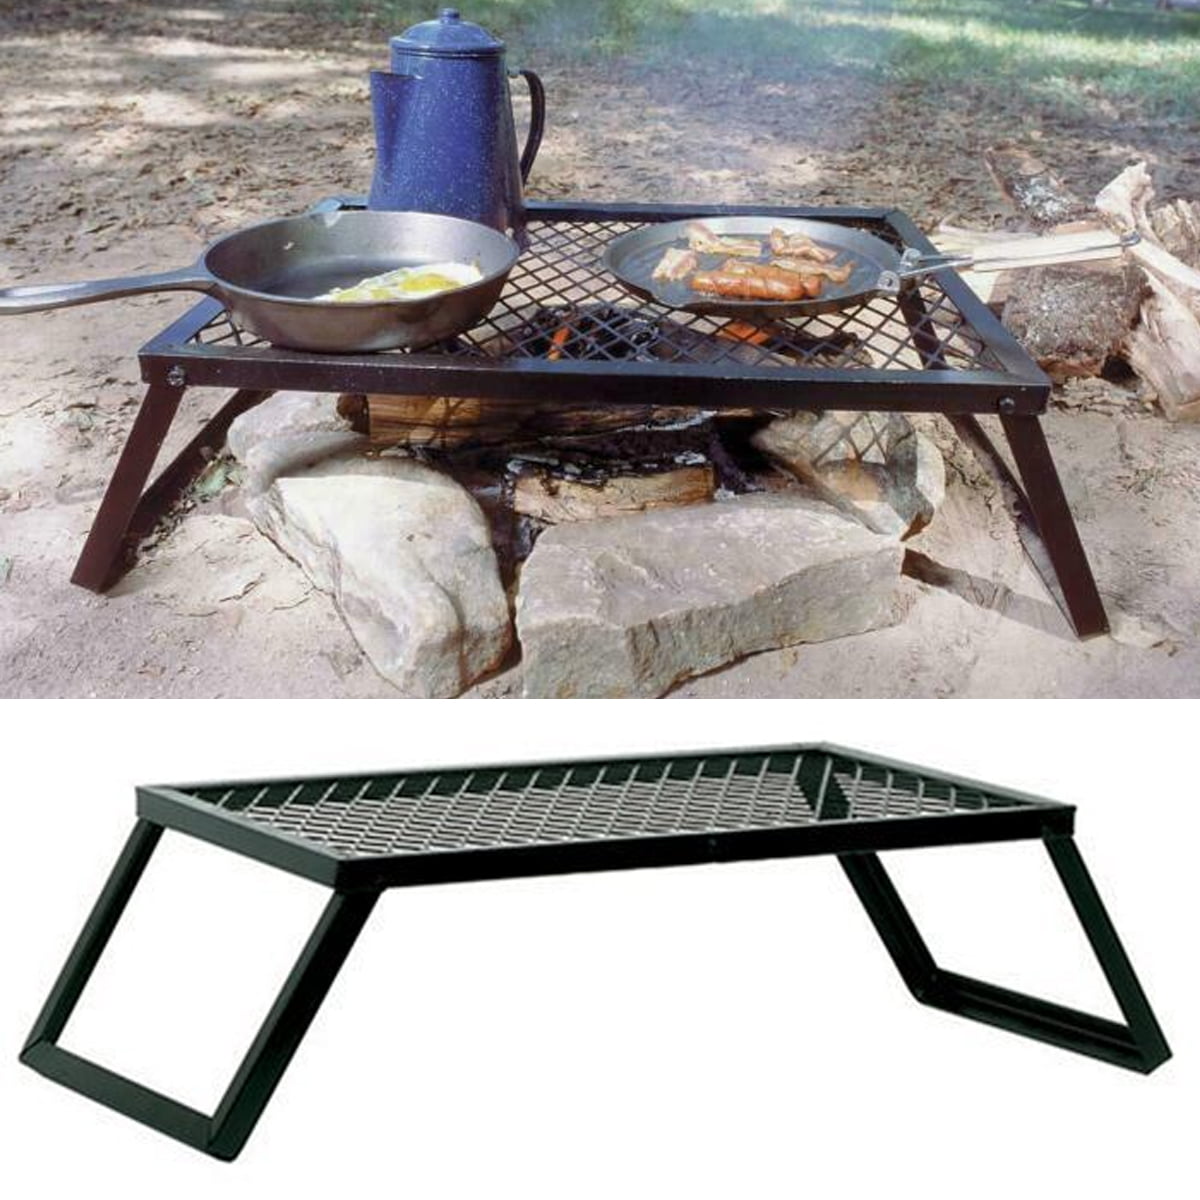 Folding Camp Campfire Grill Titanium Round BBQ grill Net with Legs Carrying Bag 